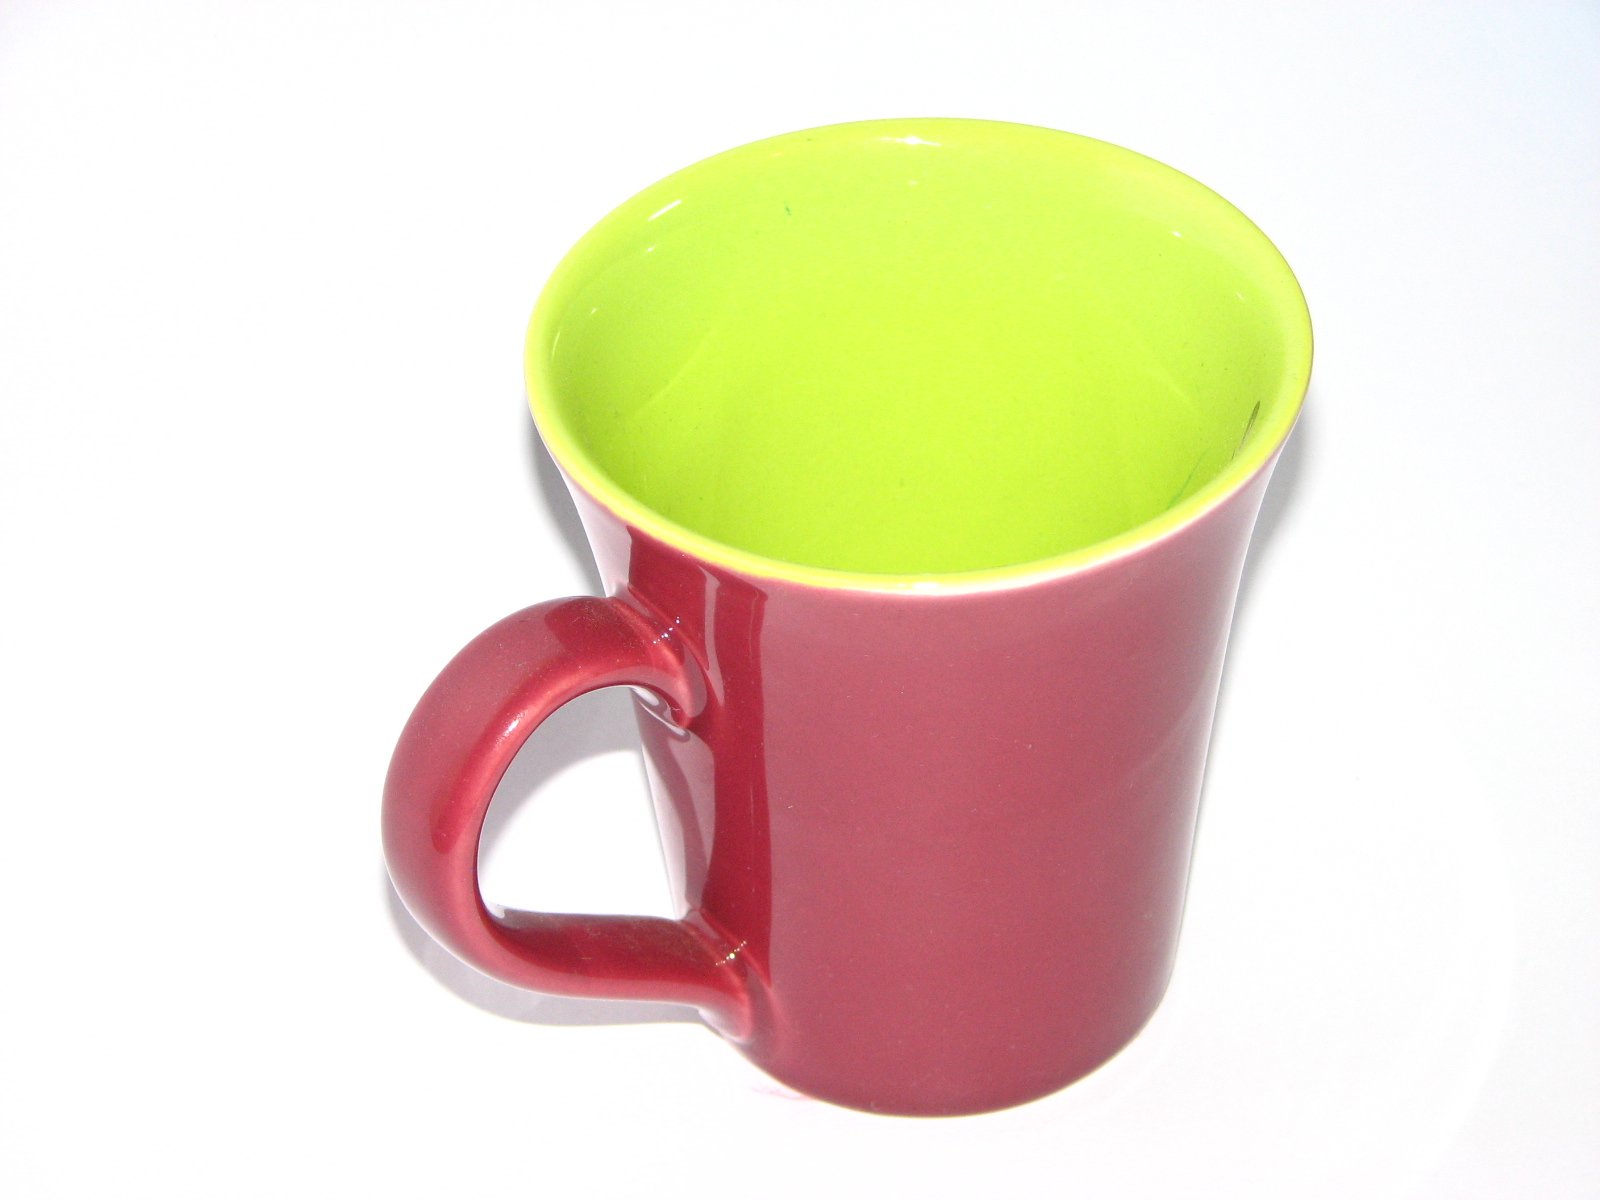 a cup sits in the foreground with a white background